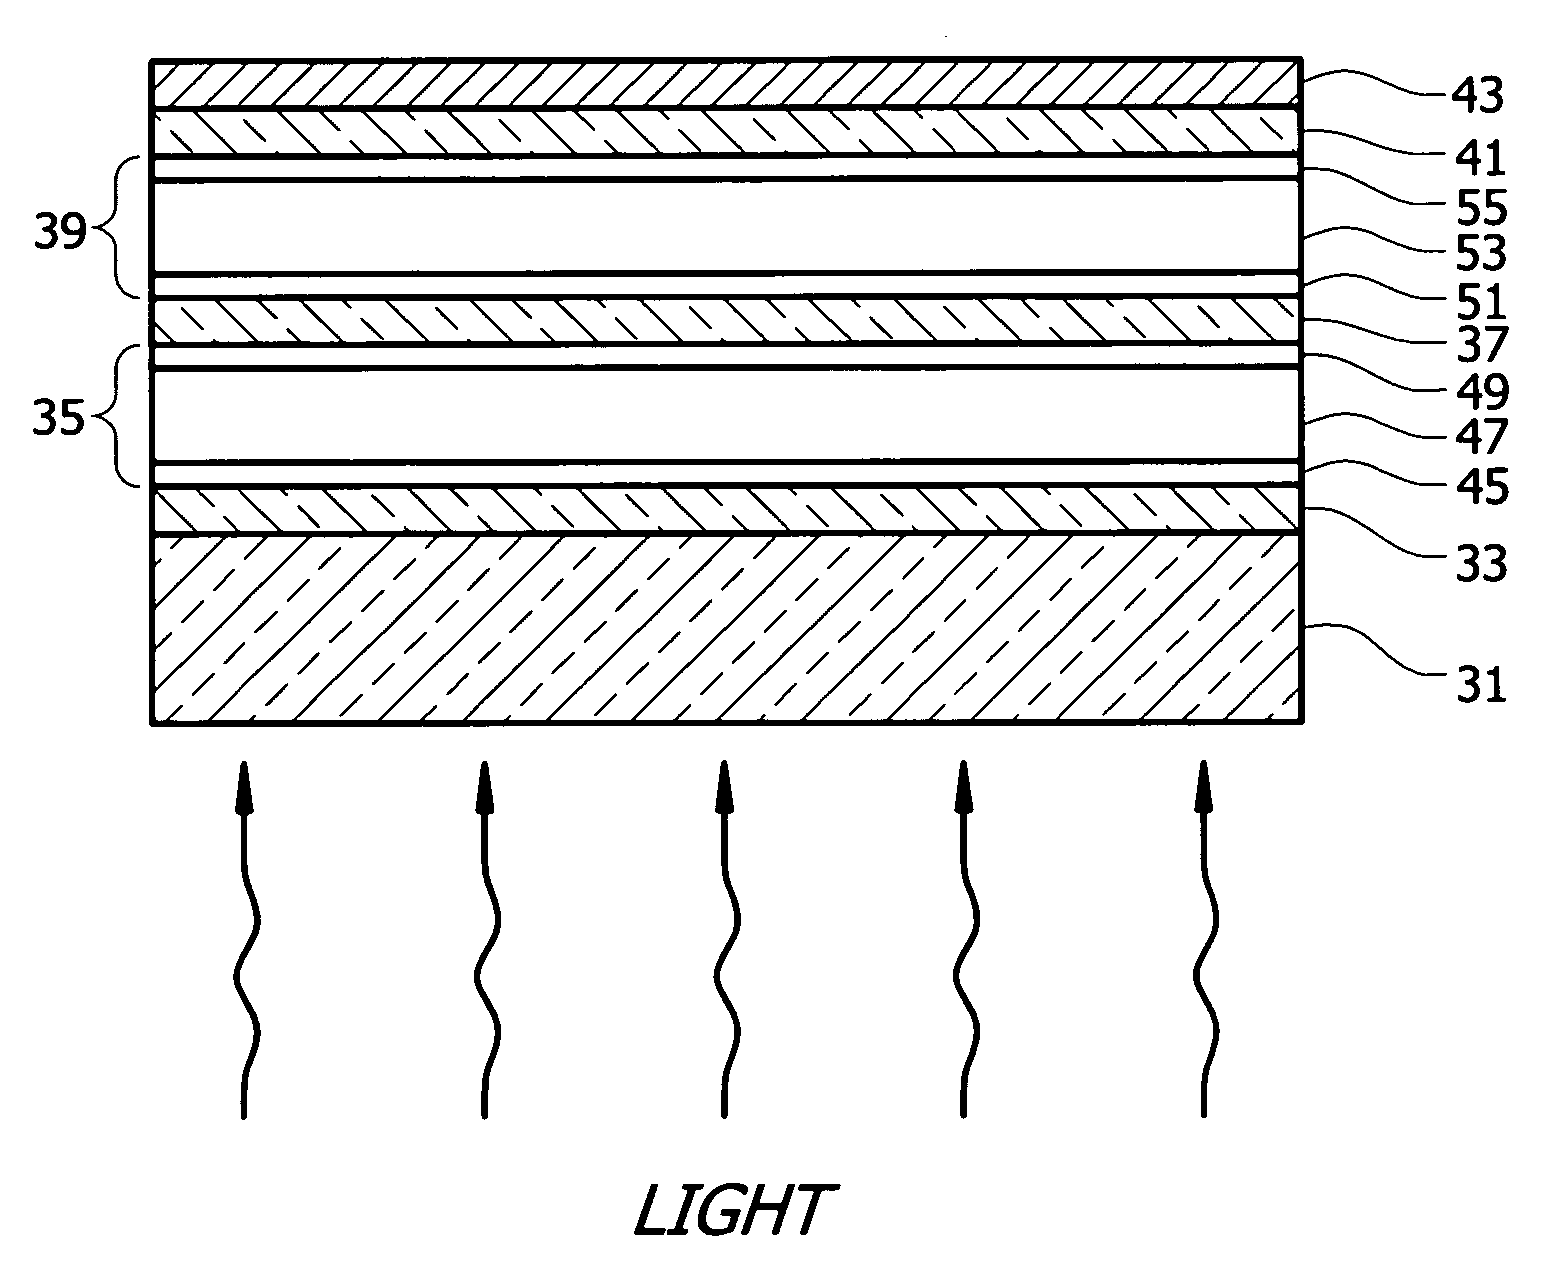 Multiple junction photovolatic devices and process for making the same